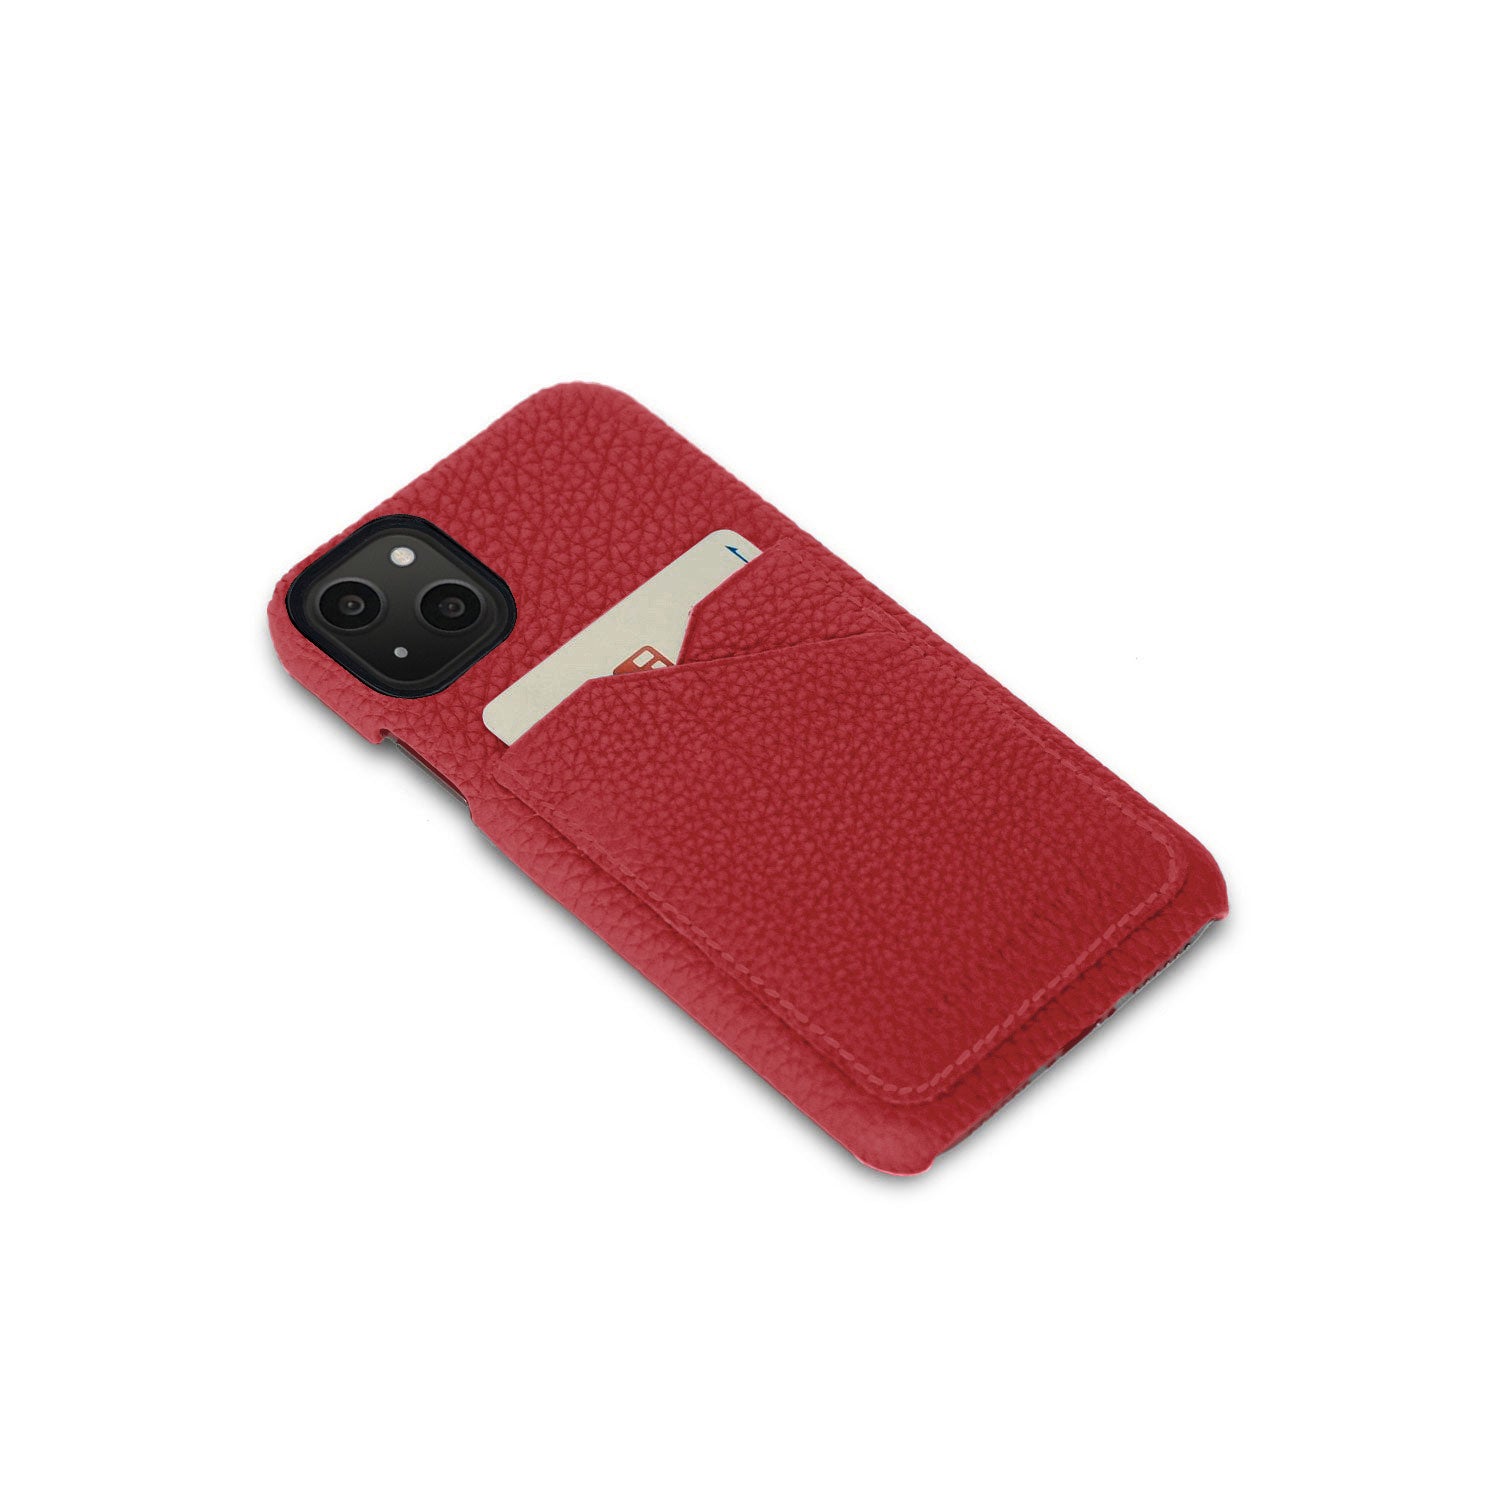 (iPhone 13) Back cover case Shrink leather